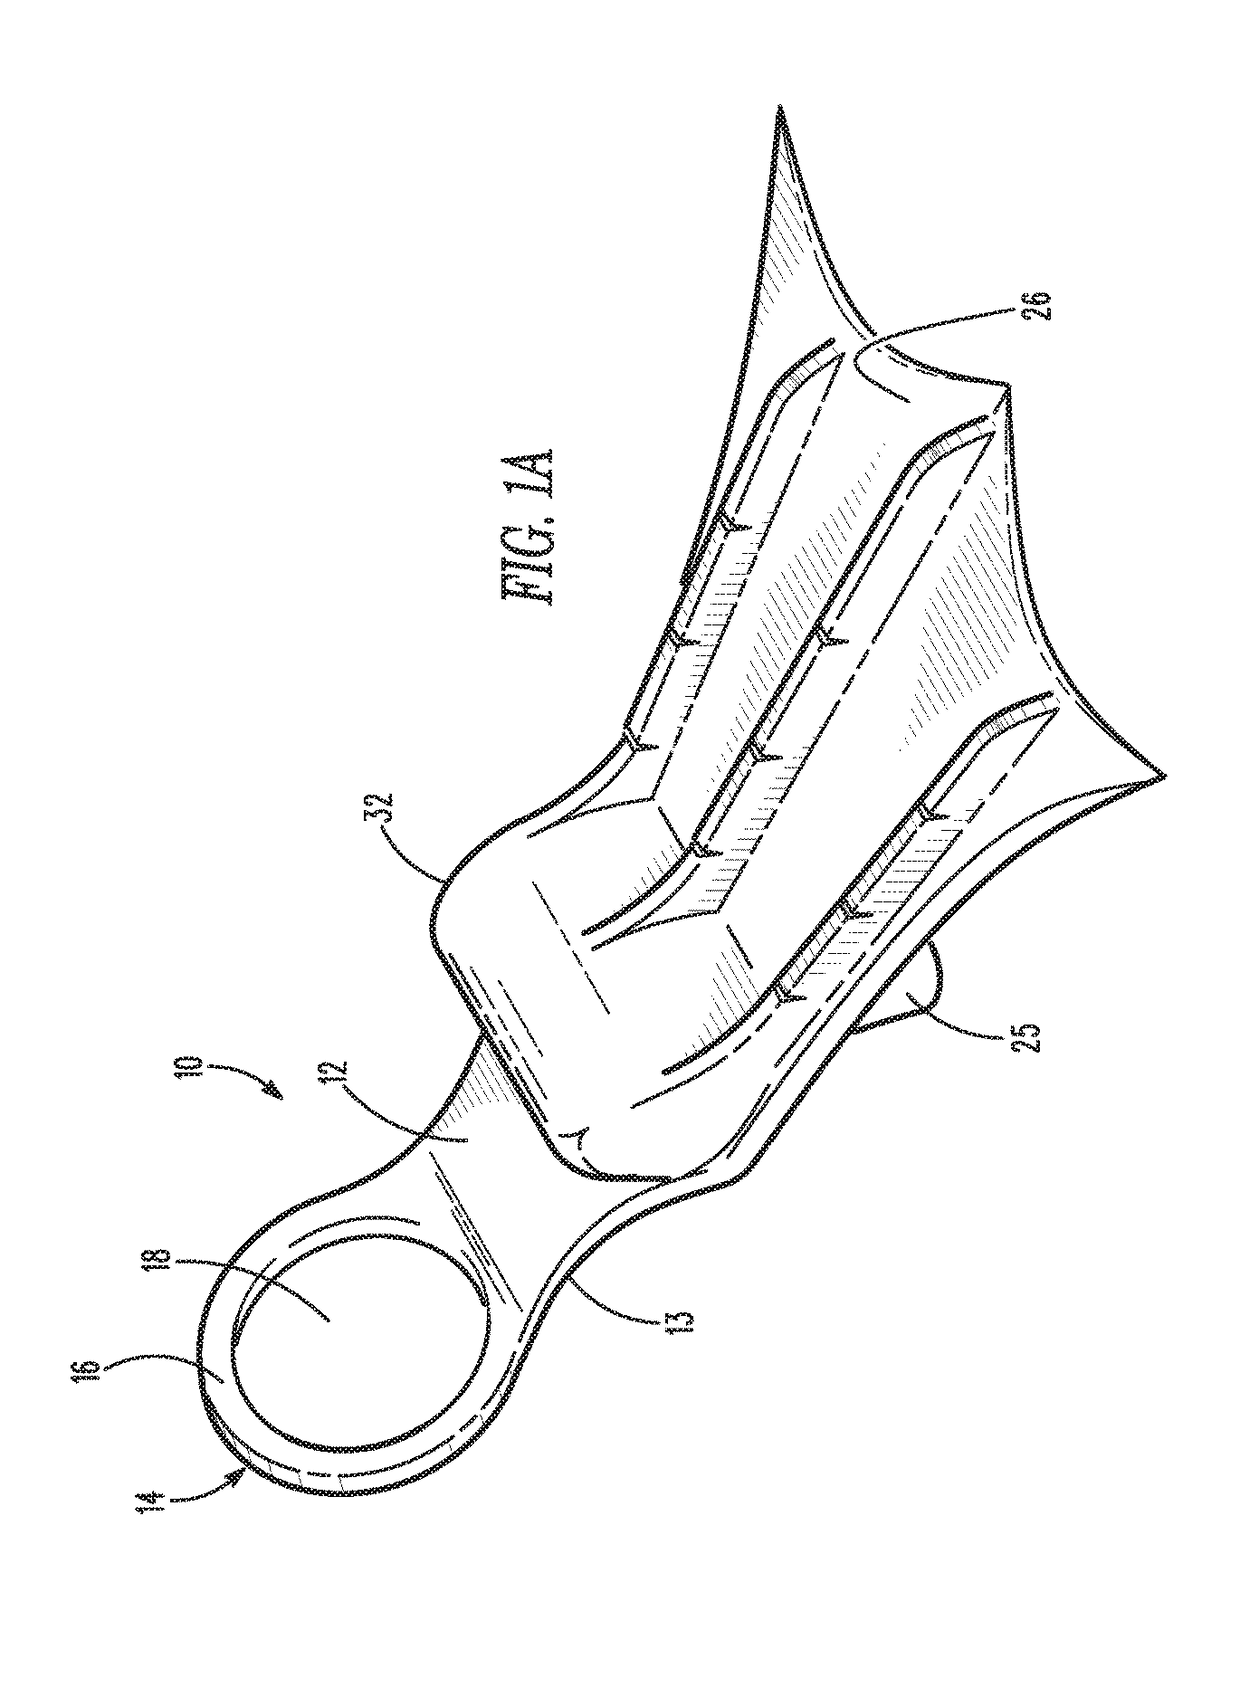 Hand-held paddle apparatuses and methods of using the same